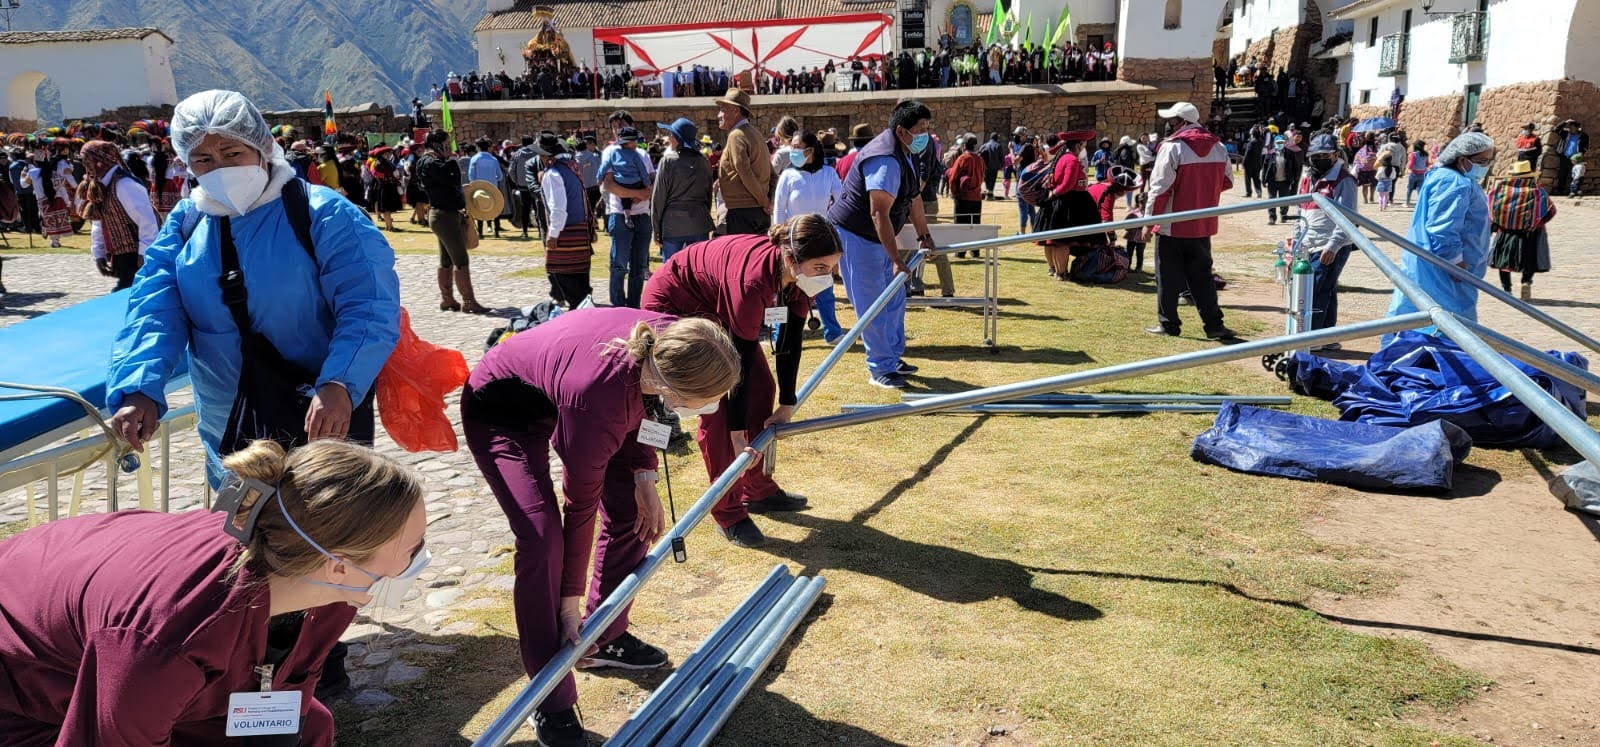 Students helping to set up a tent. They are holding metal poles to create the tent structure. In the background is a plaza full of Peruvian people